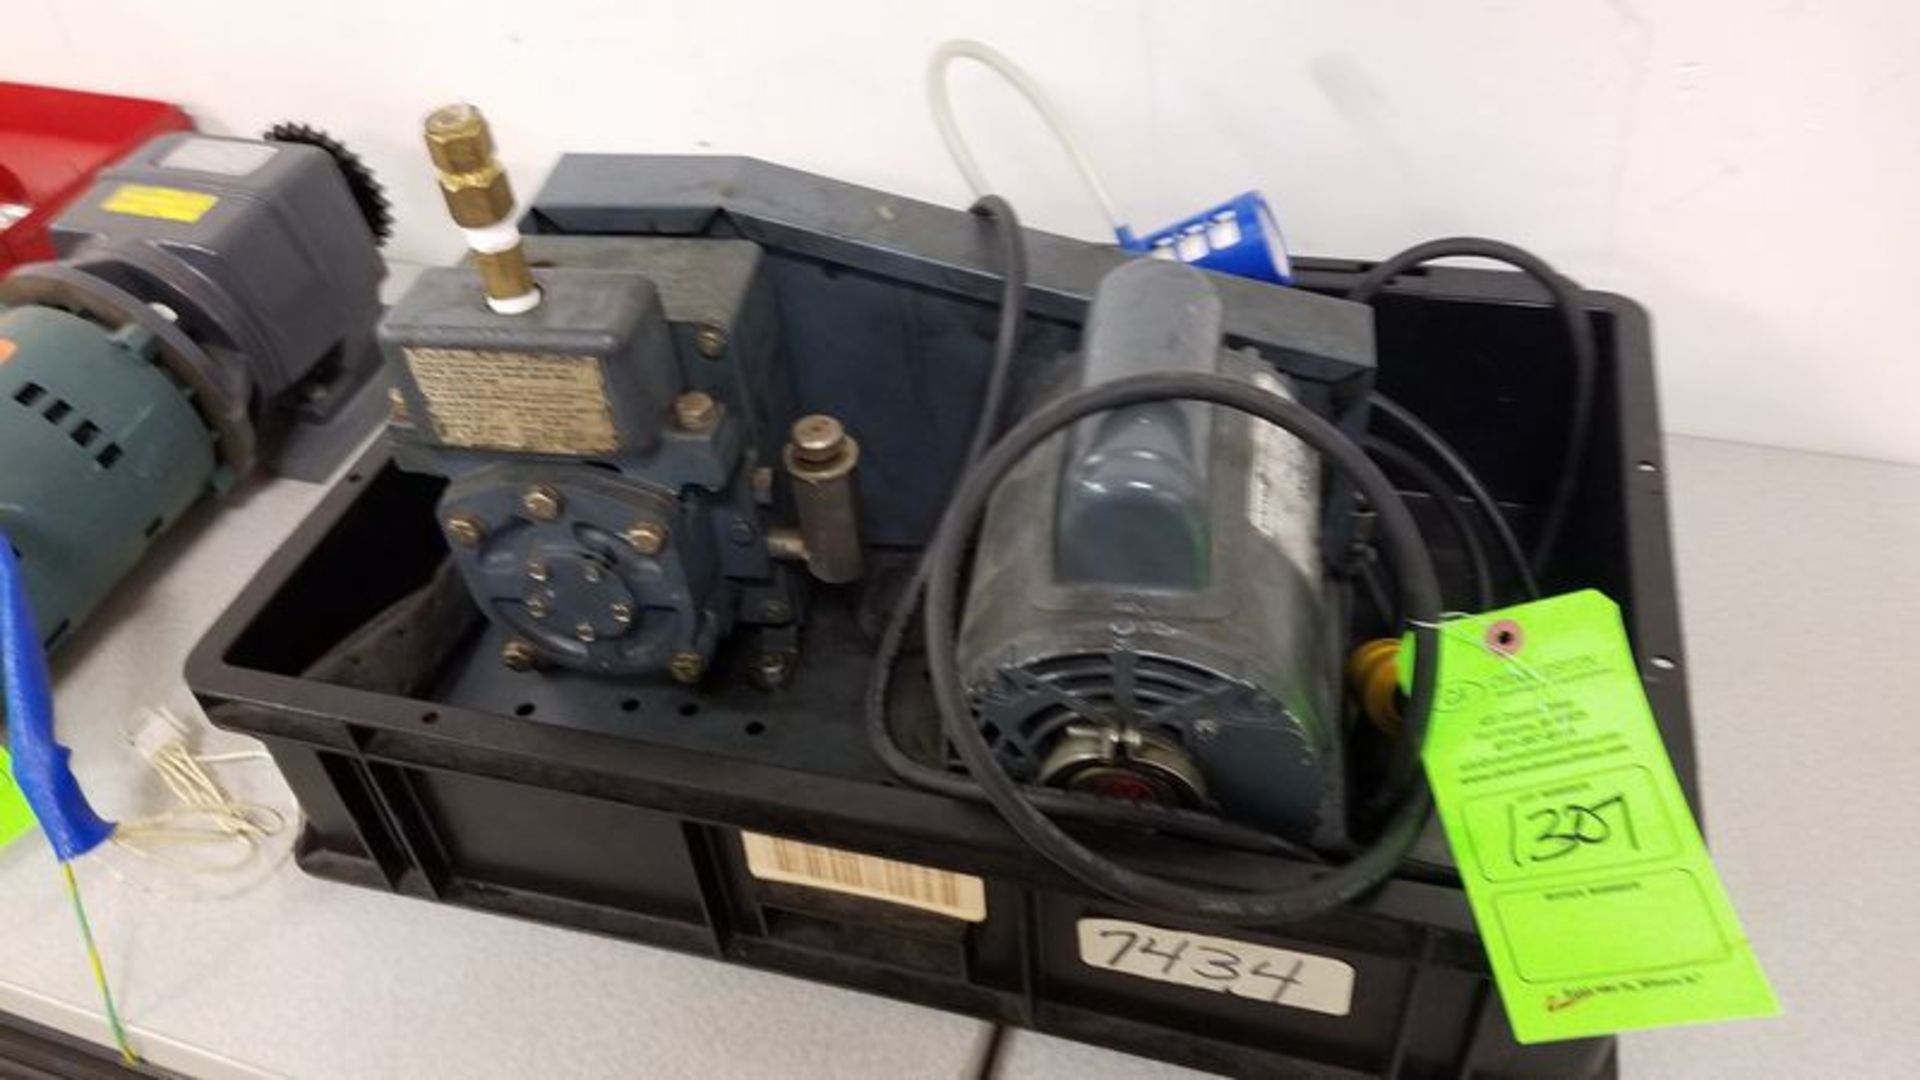 WELCH DUO-SEAL VACUUM PUMP W/GE 1/2 HP MOTOR M# 1400(LOCATED AT 627 HARTZELL ROAD NEW HAVEN IN